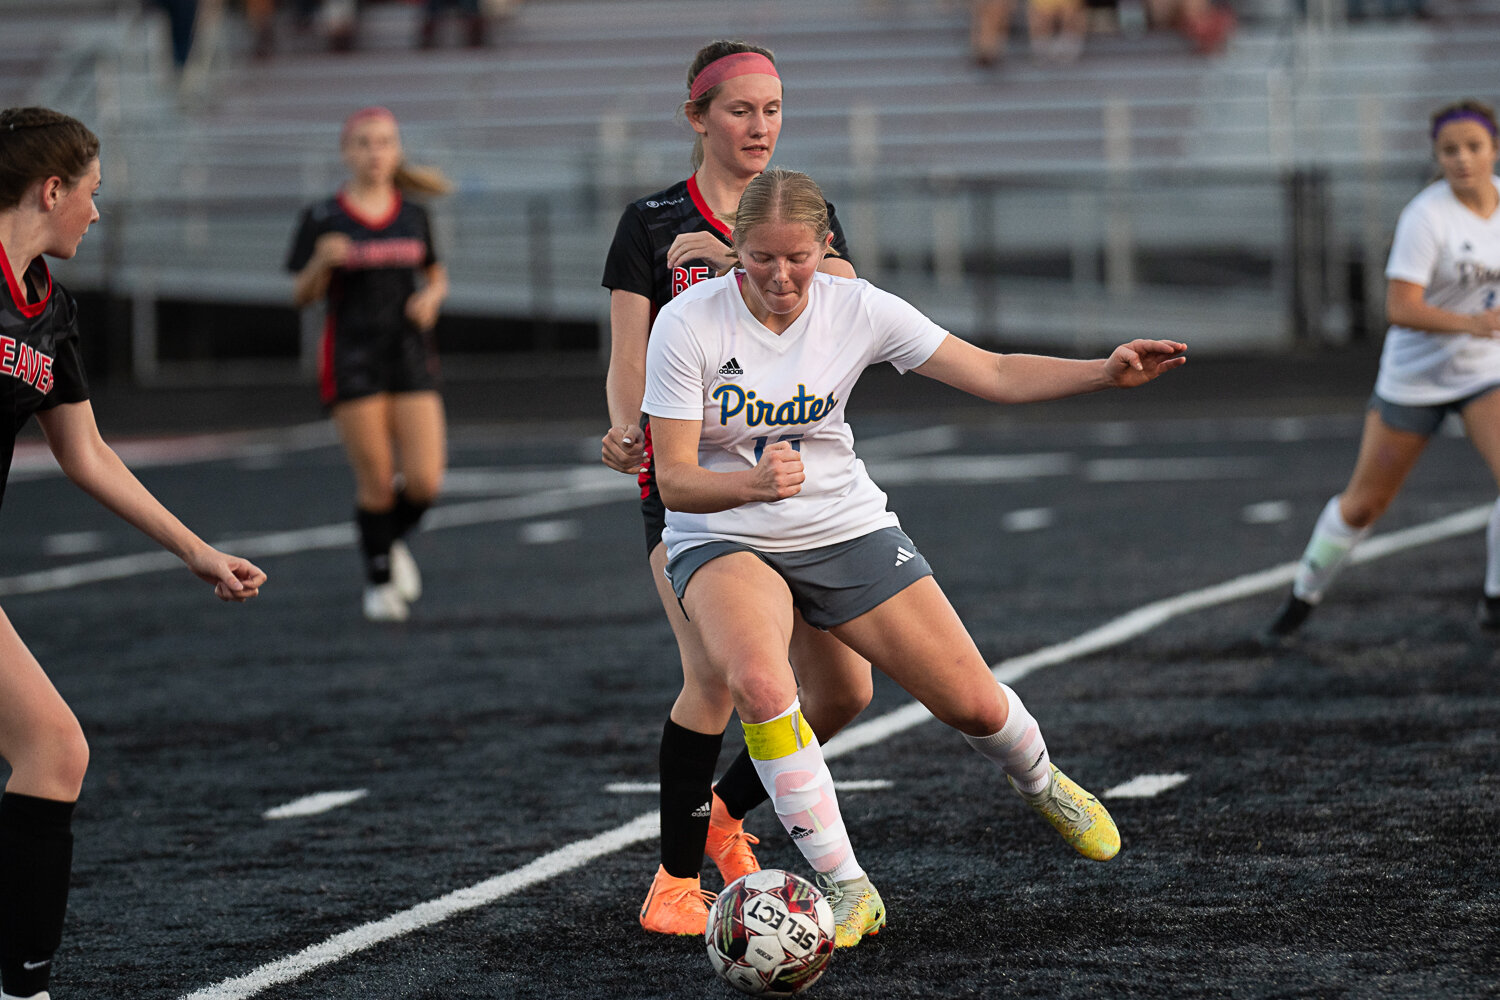 Adna's Margarite Humphrey cuts off Tenino's Callie Mickelson during the first half of the Pirates' 0-0 draw against the Beavers on Sept. 14.